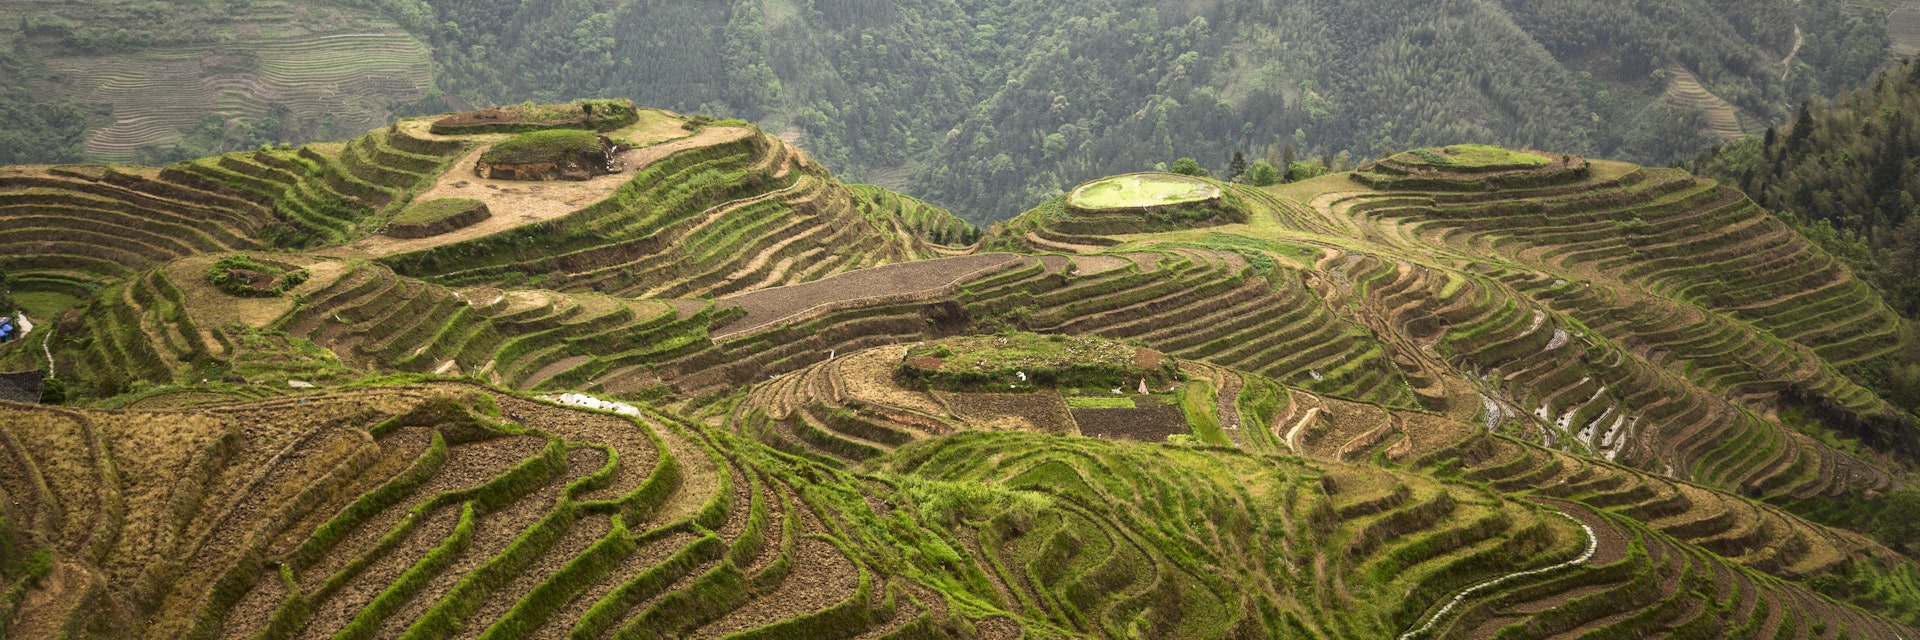 The Longji terraces area is famous for the excessively large number of terraced rice paddy fields on its mountain, which have created an intricate pattern on the hillsides. Set amongst the villages of the minorities Zhuang and Yao, the area allows for easy to moderate walking/hiking possibilities along and up hillsides to view the panoramas of the terraced rice fields